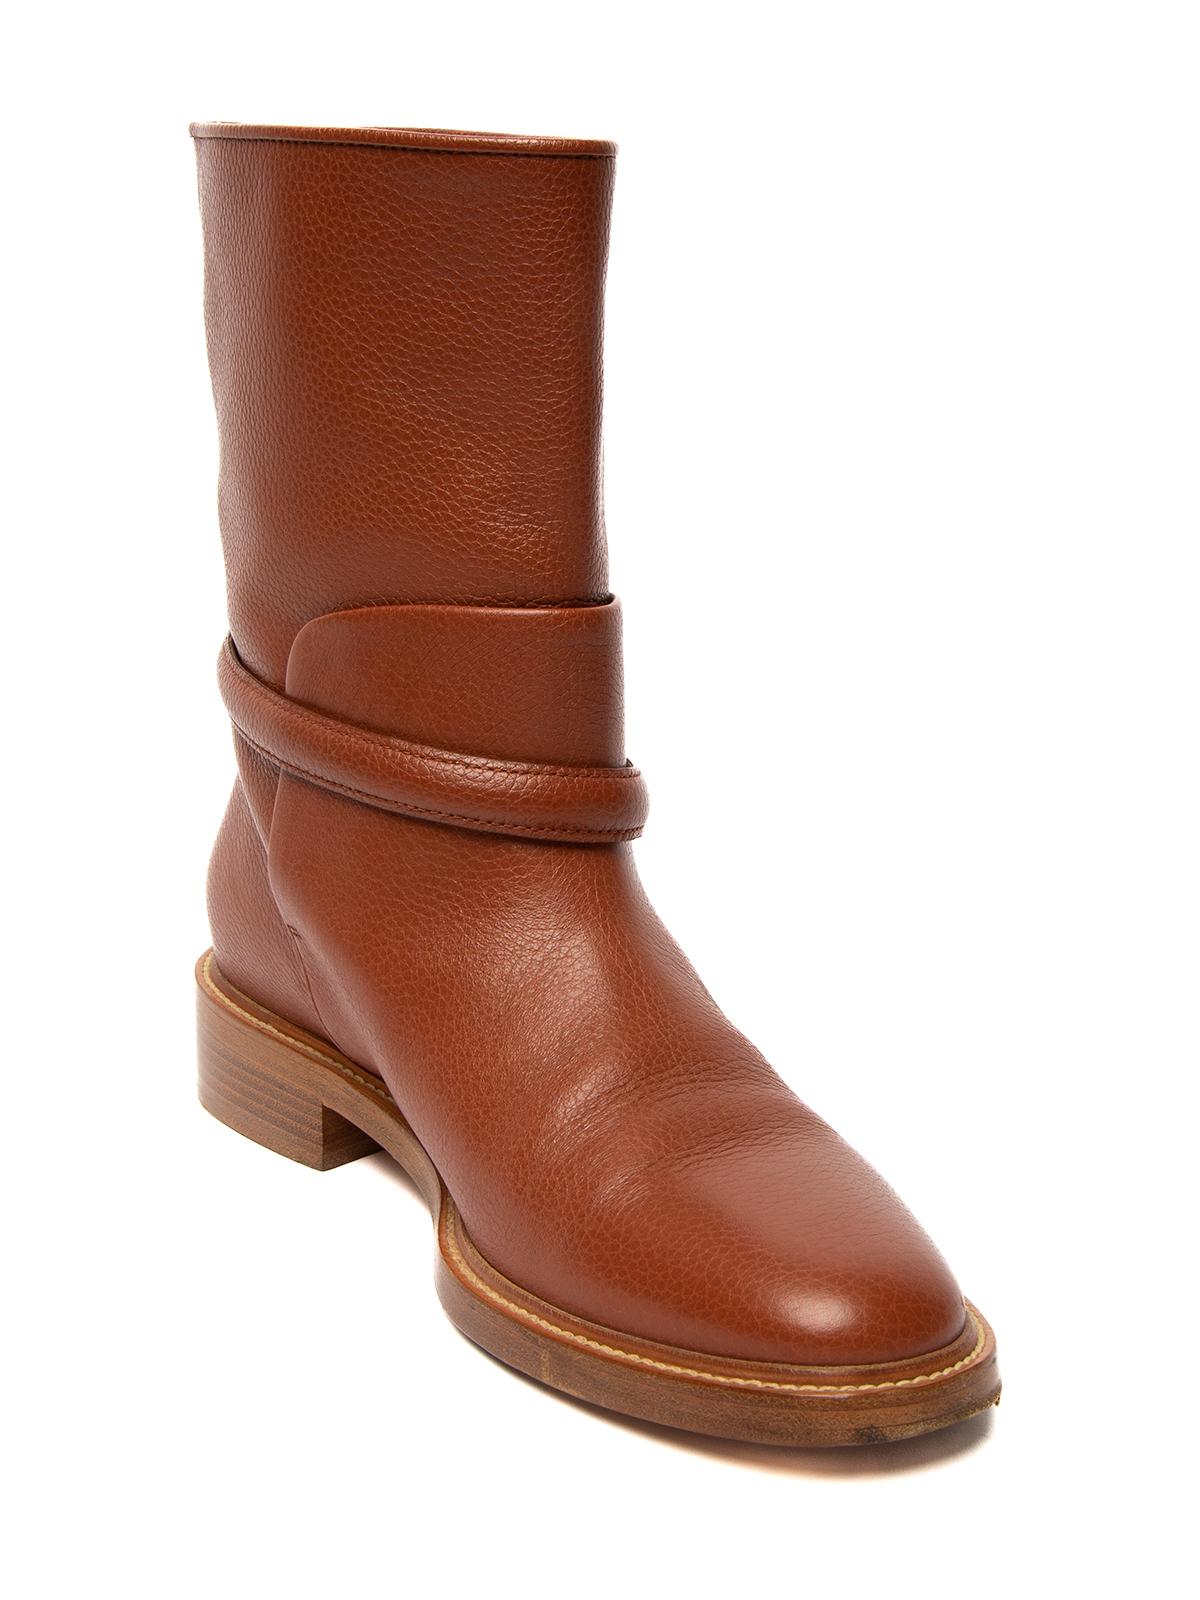 CONDITION is Good. Minor wear to boots is evident. There is natural creasing to the leather from wear and moderate signs of wear to the outsole on this used Balenciaga designer resale item. Details Colour - brown Material - leather Style - ankle